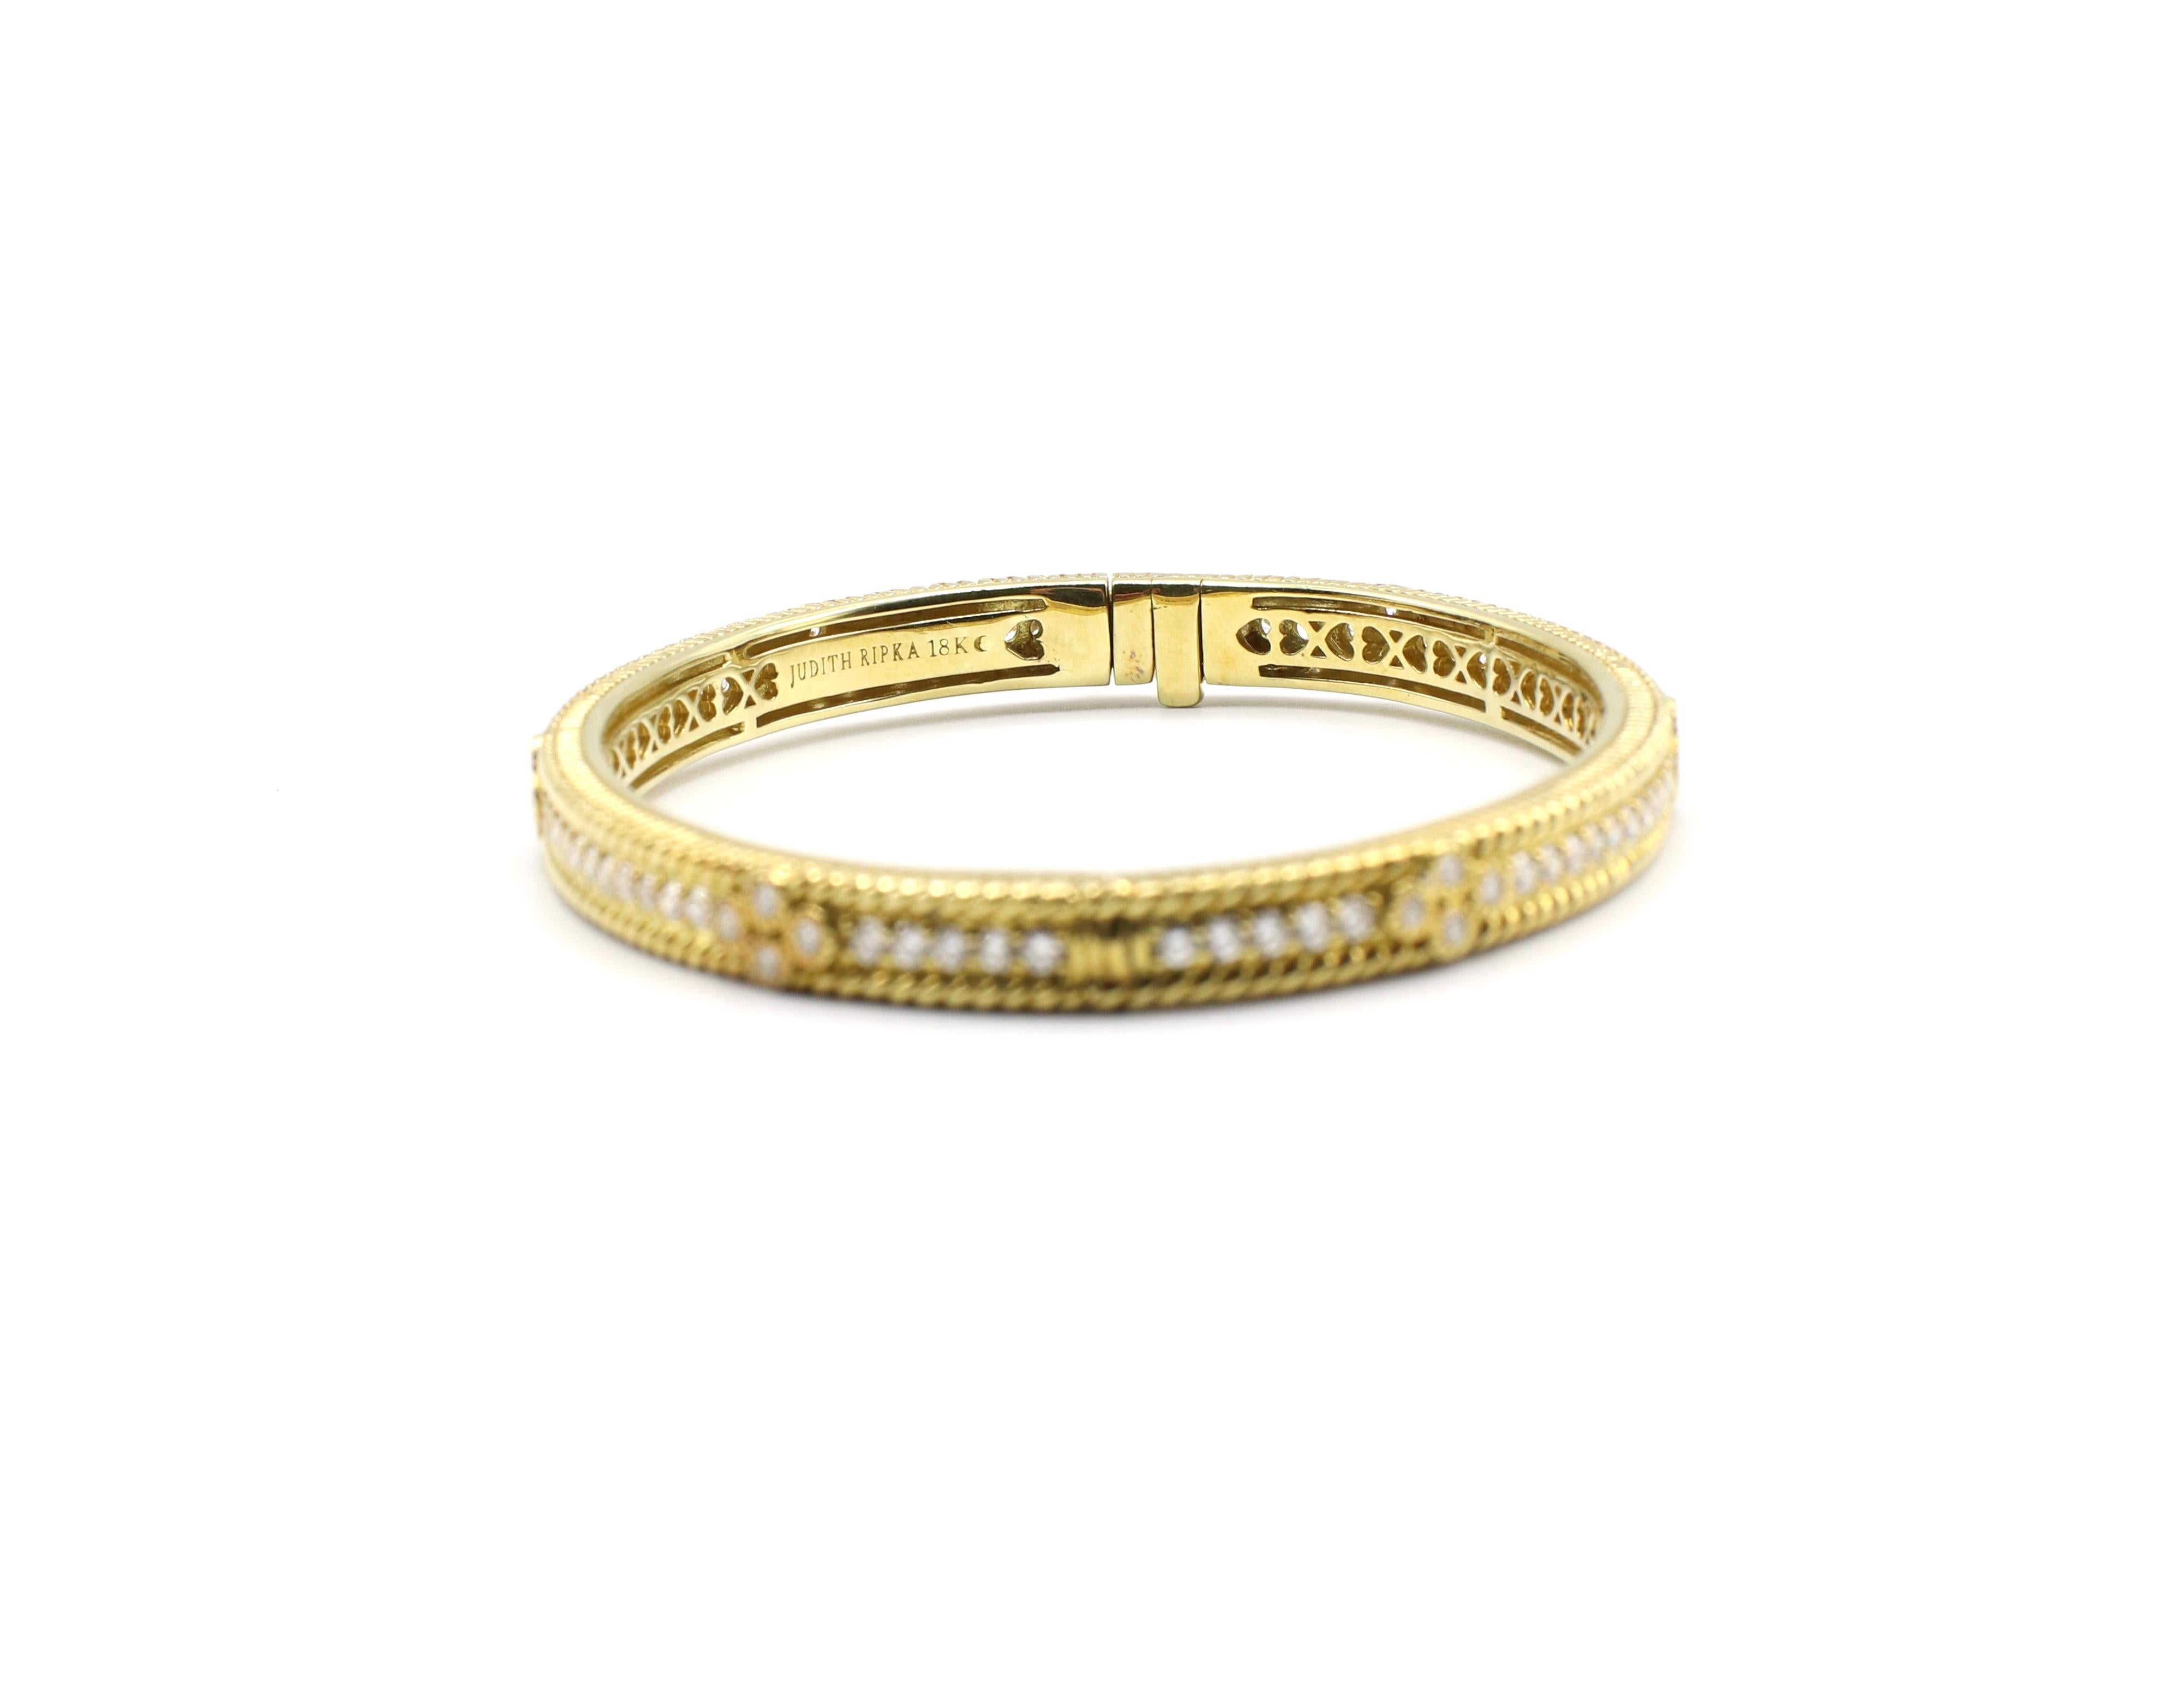 For Sale is a Judith Ripka Bangle Bracelet from the Romance collection in 18K Yellow Gold. Set the this piece are approx. 2.50 CTW of Round Brilliant Cut Diamonds. The bracelet is hinged for ease of wear. We estimate it to fit approx. a 6.5-7 inch